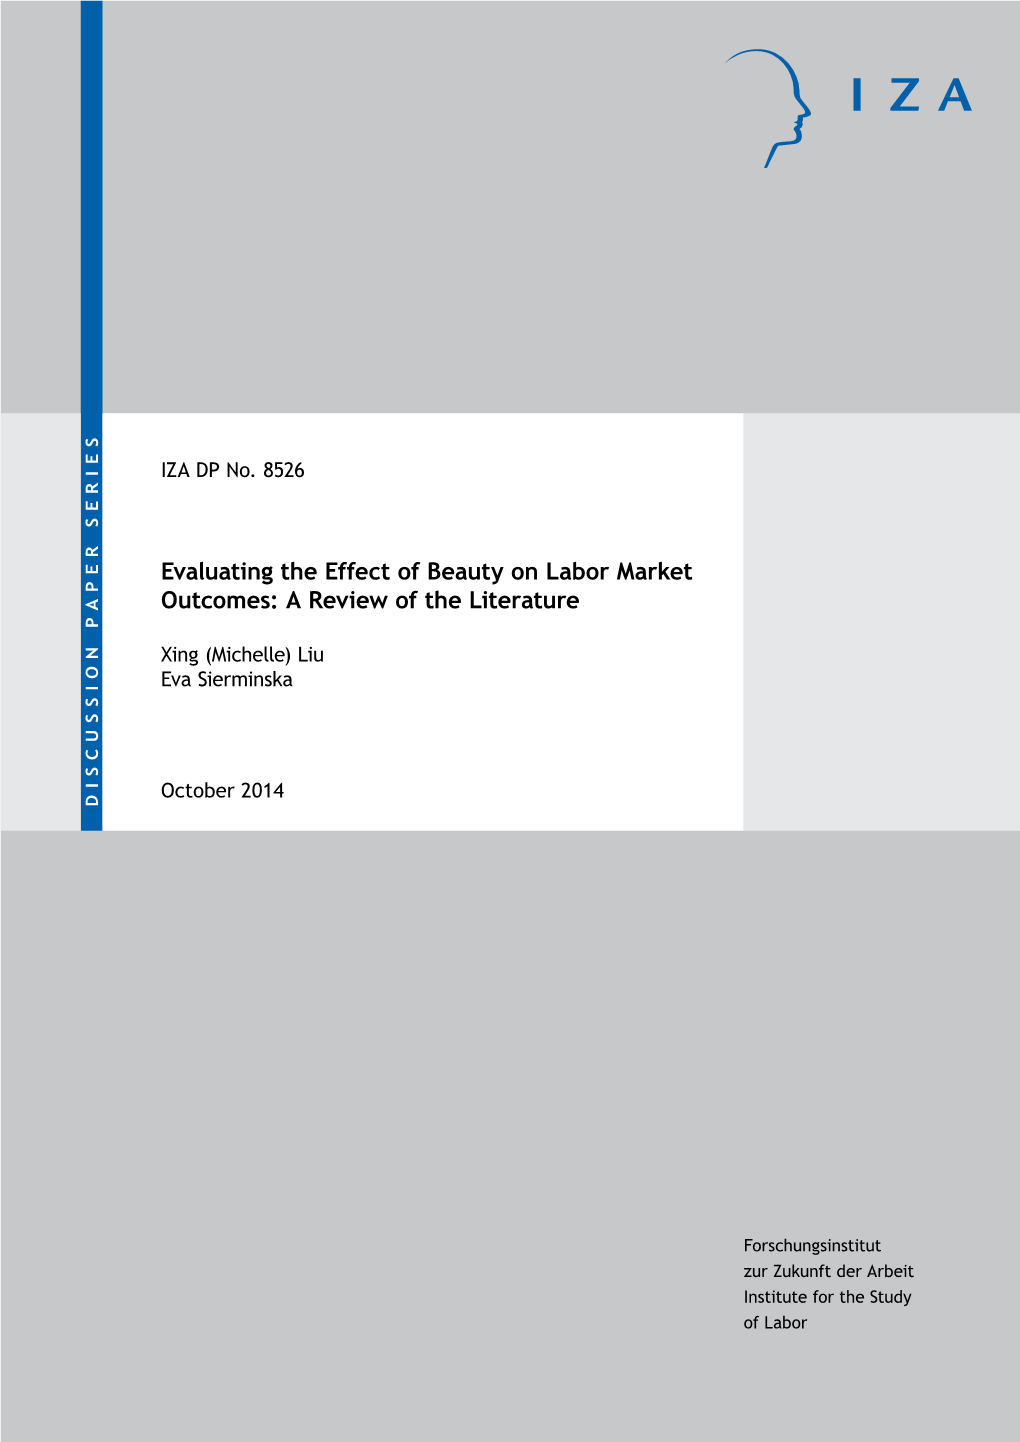 Evaluating the Effect of Beauty on Labor Market Outcomes: a Review of the Literature